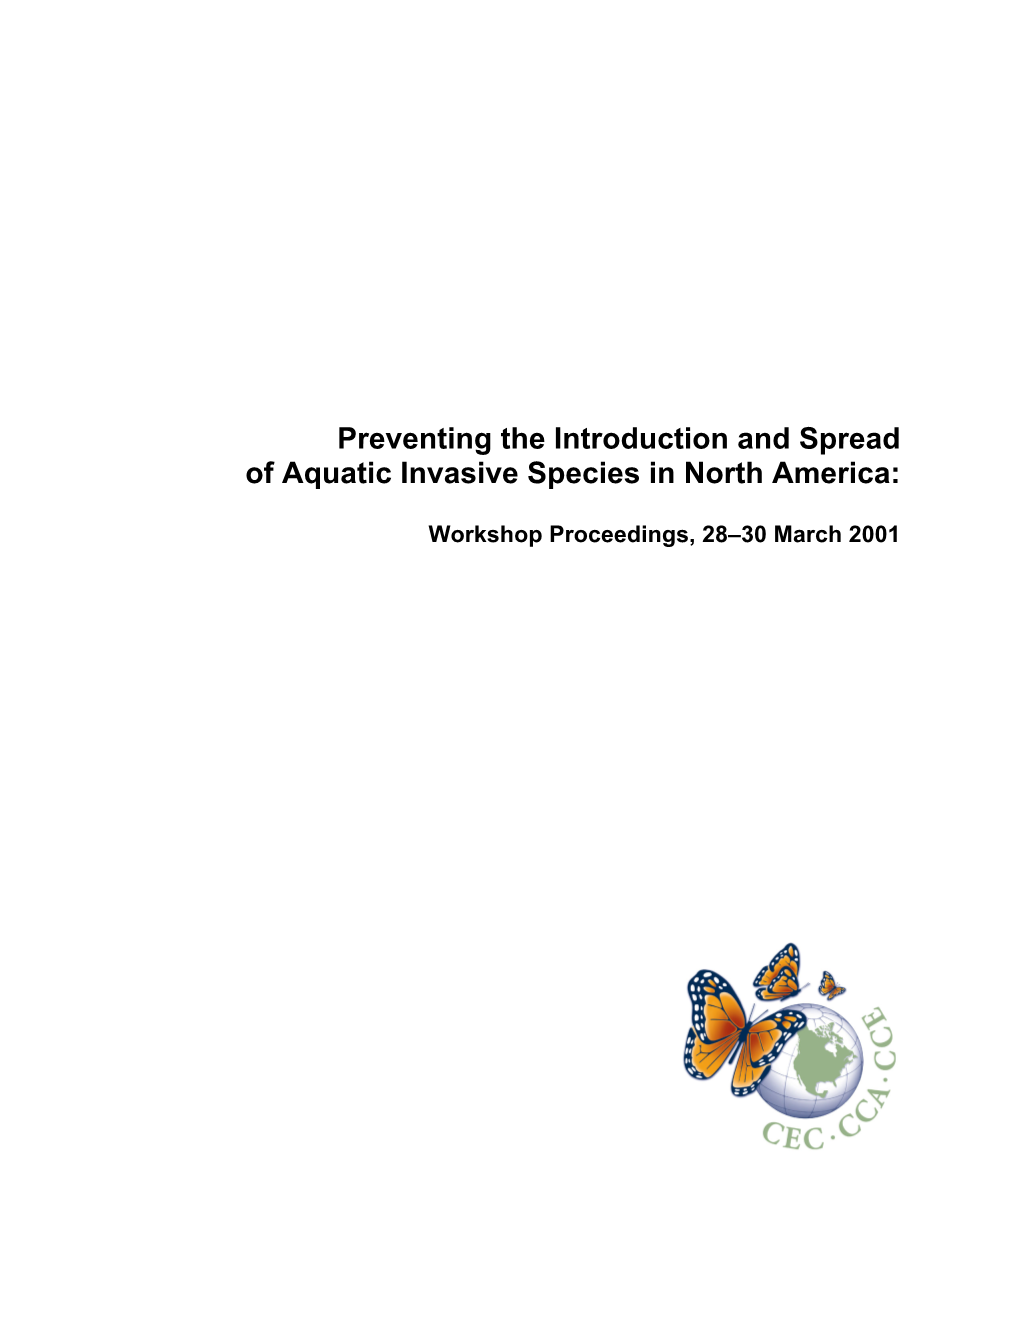 Preventing the Introduction and Spread of Aquatic Invasive Species in North America